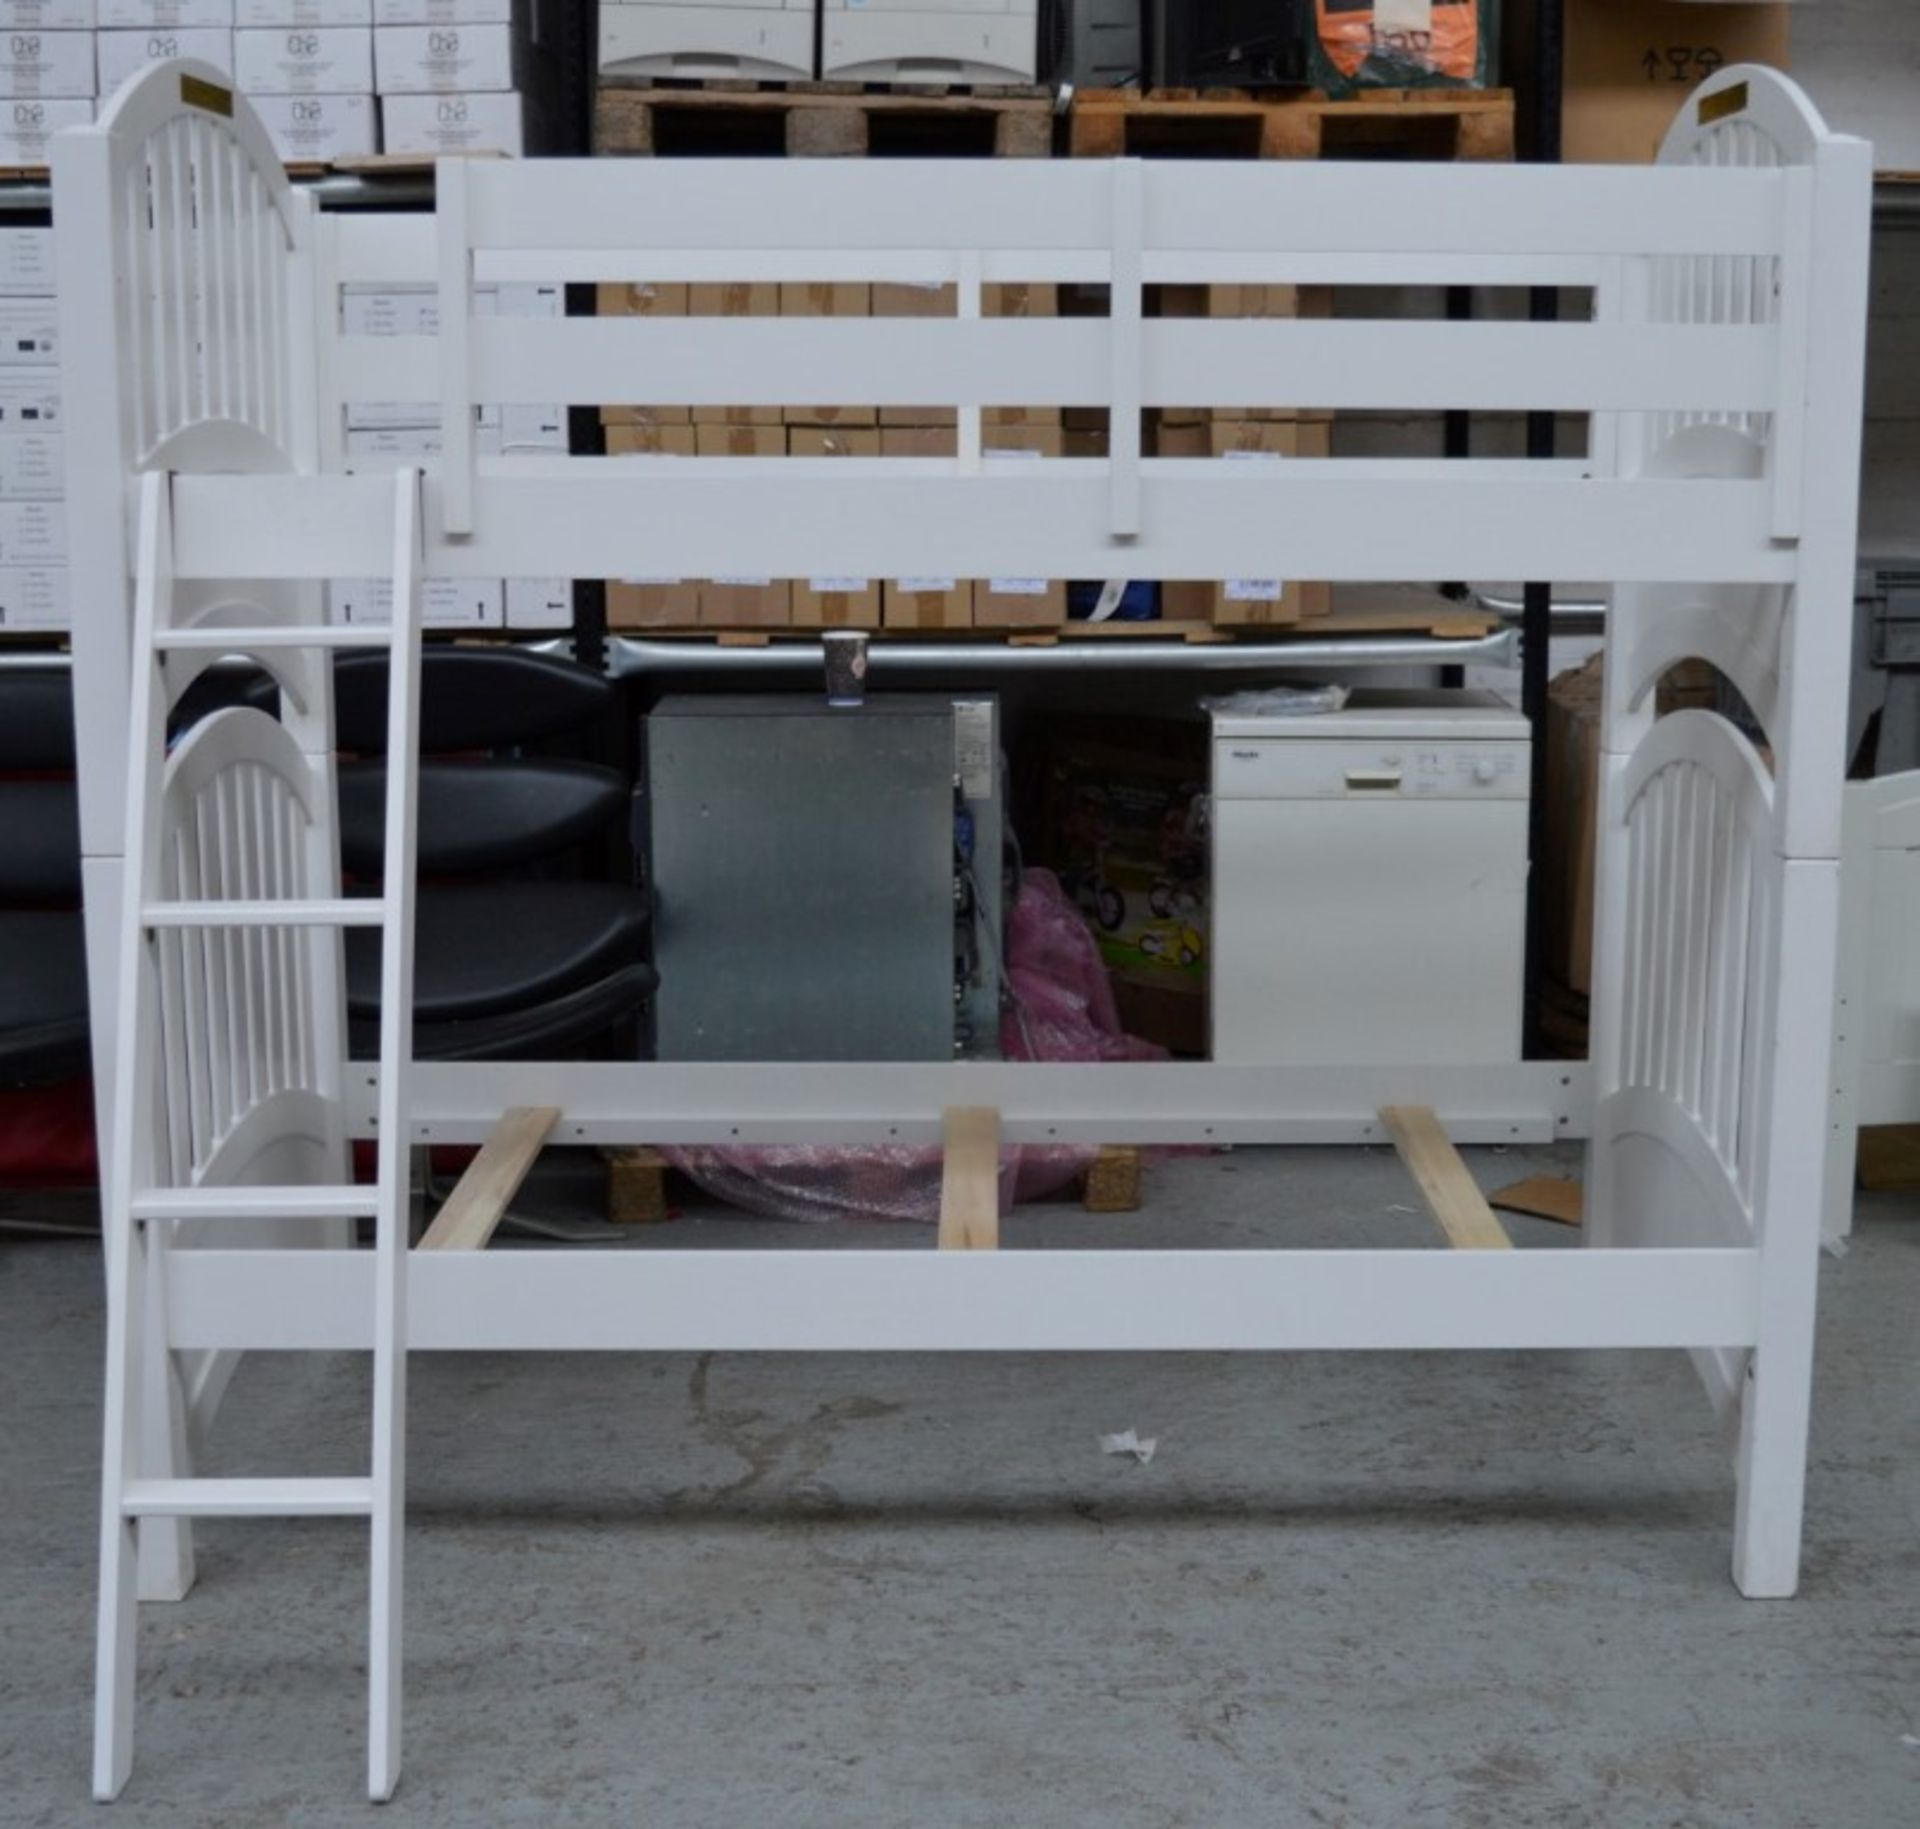 1 x Lea Getaway Twin over Twin Bunk Bed - Unused With Cosmetic Blemishes - CL011 - Location: - Image 2 of 13